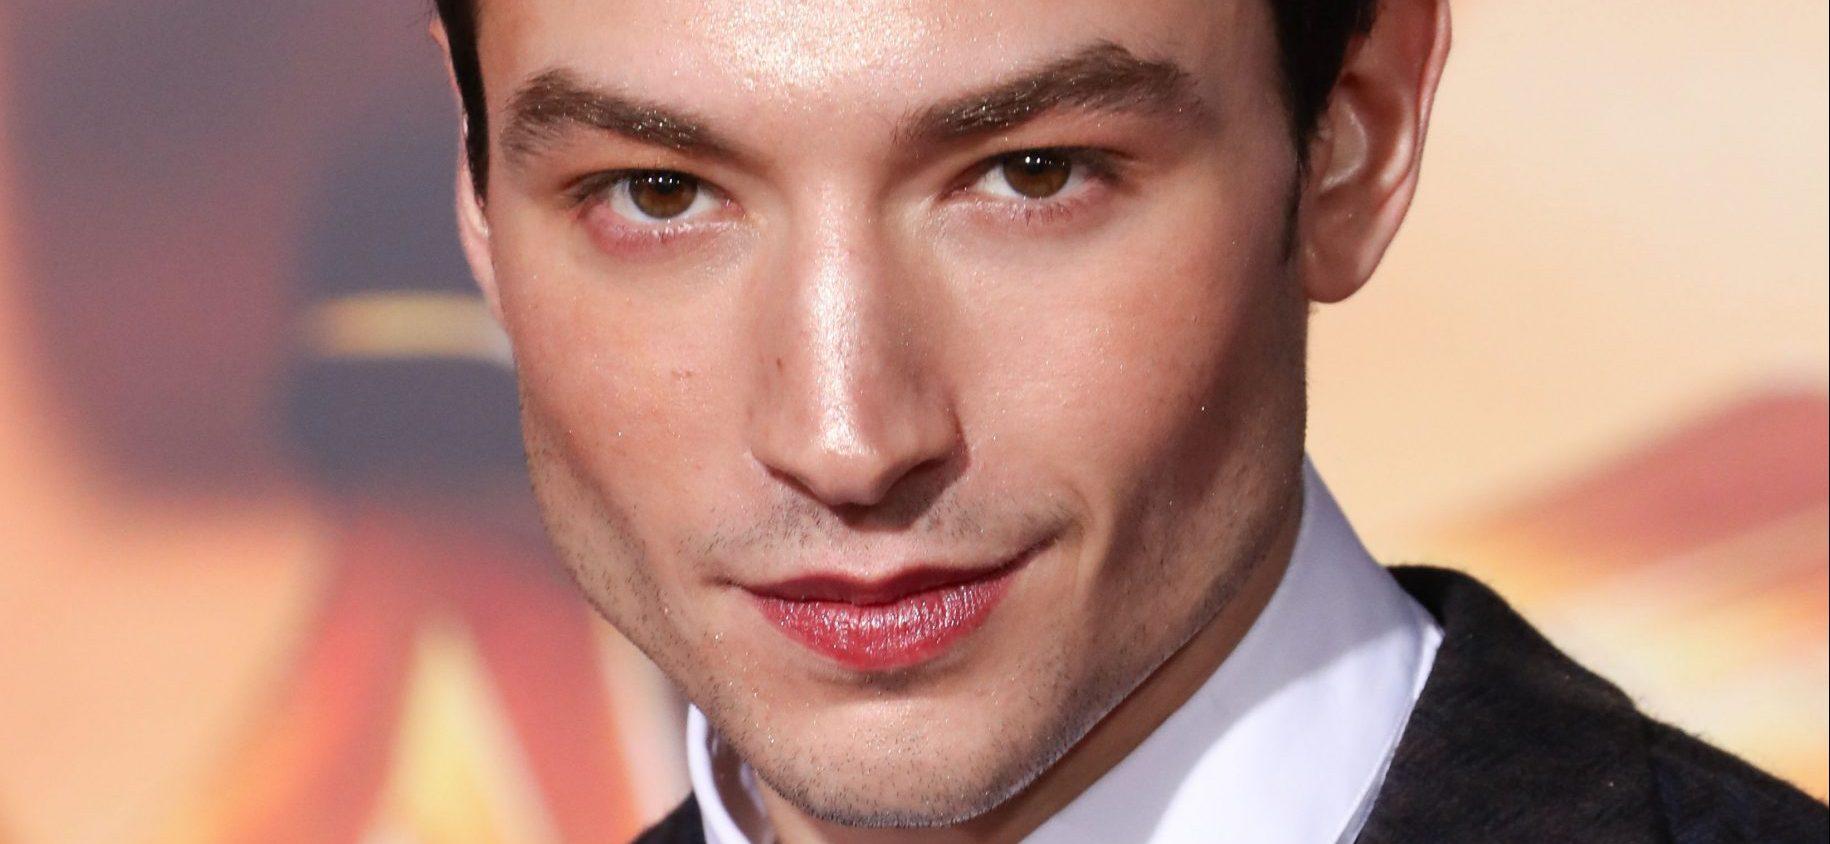 People Have Called The Cops On Ezra Miller 10 Times In Under A Month